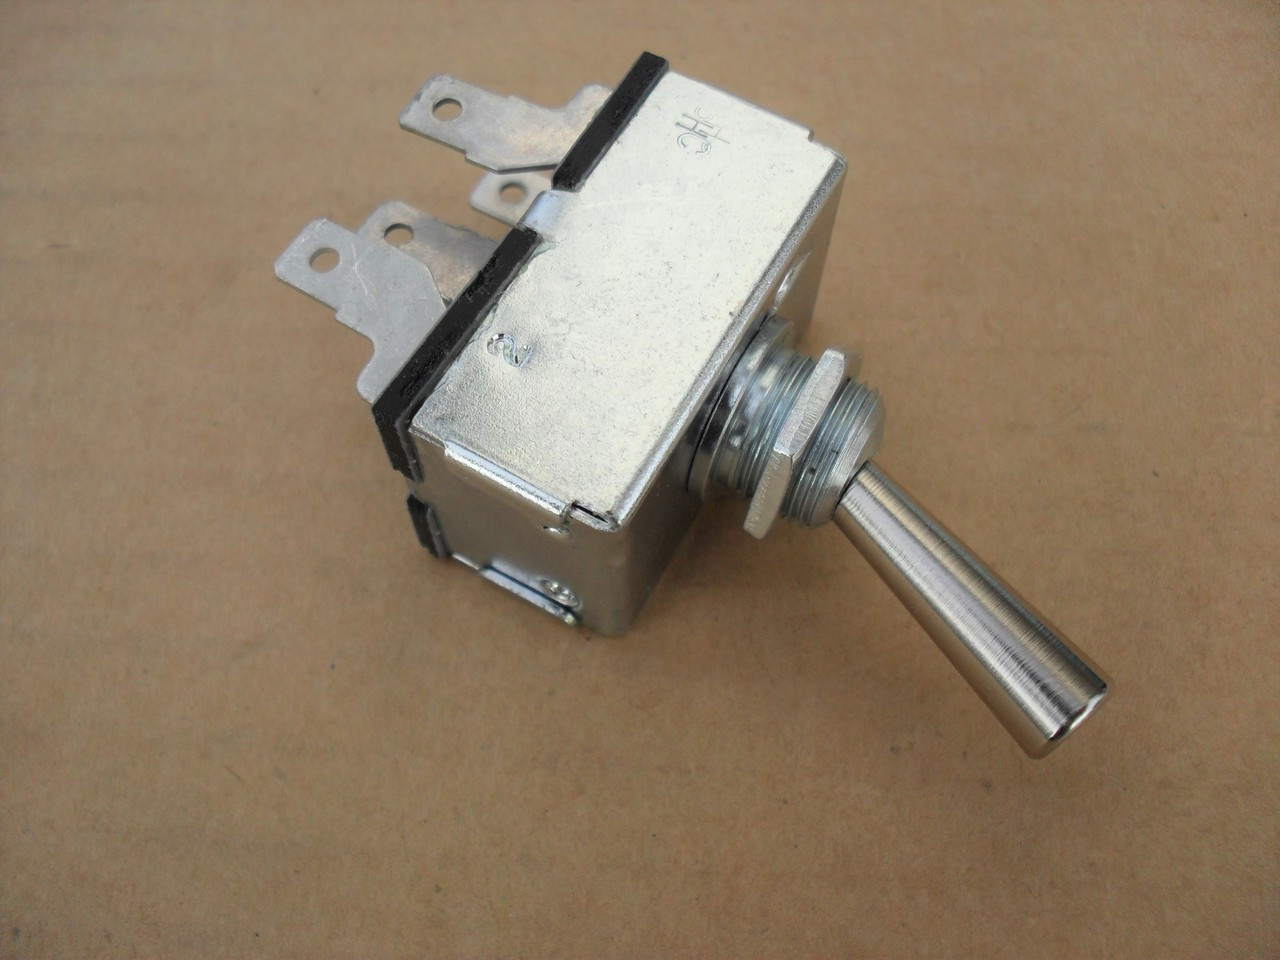 PTO Switch for Scag 32"to72" belt drive walk behind, 36", 48", 52" hydraulic walk behind, 5 Terminals, Made by Indak 430-508